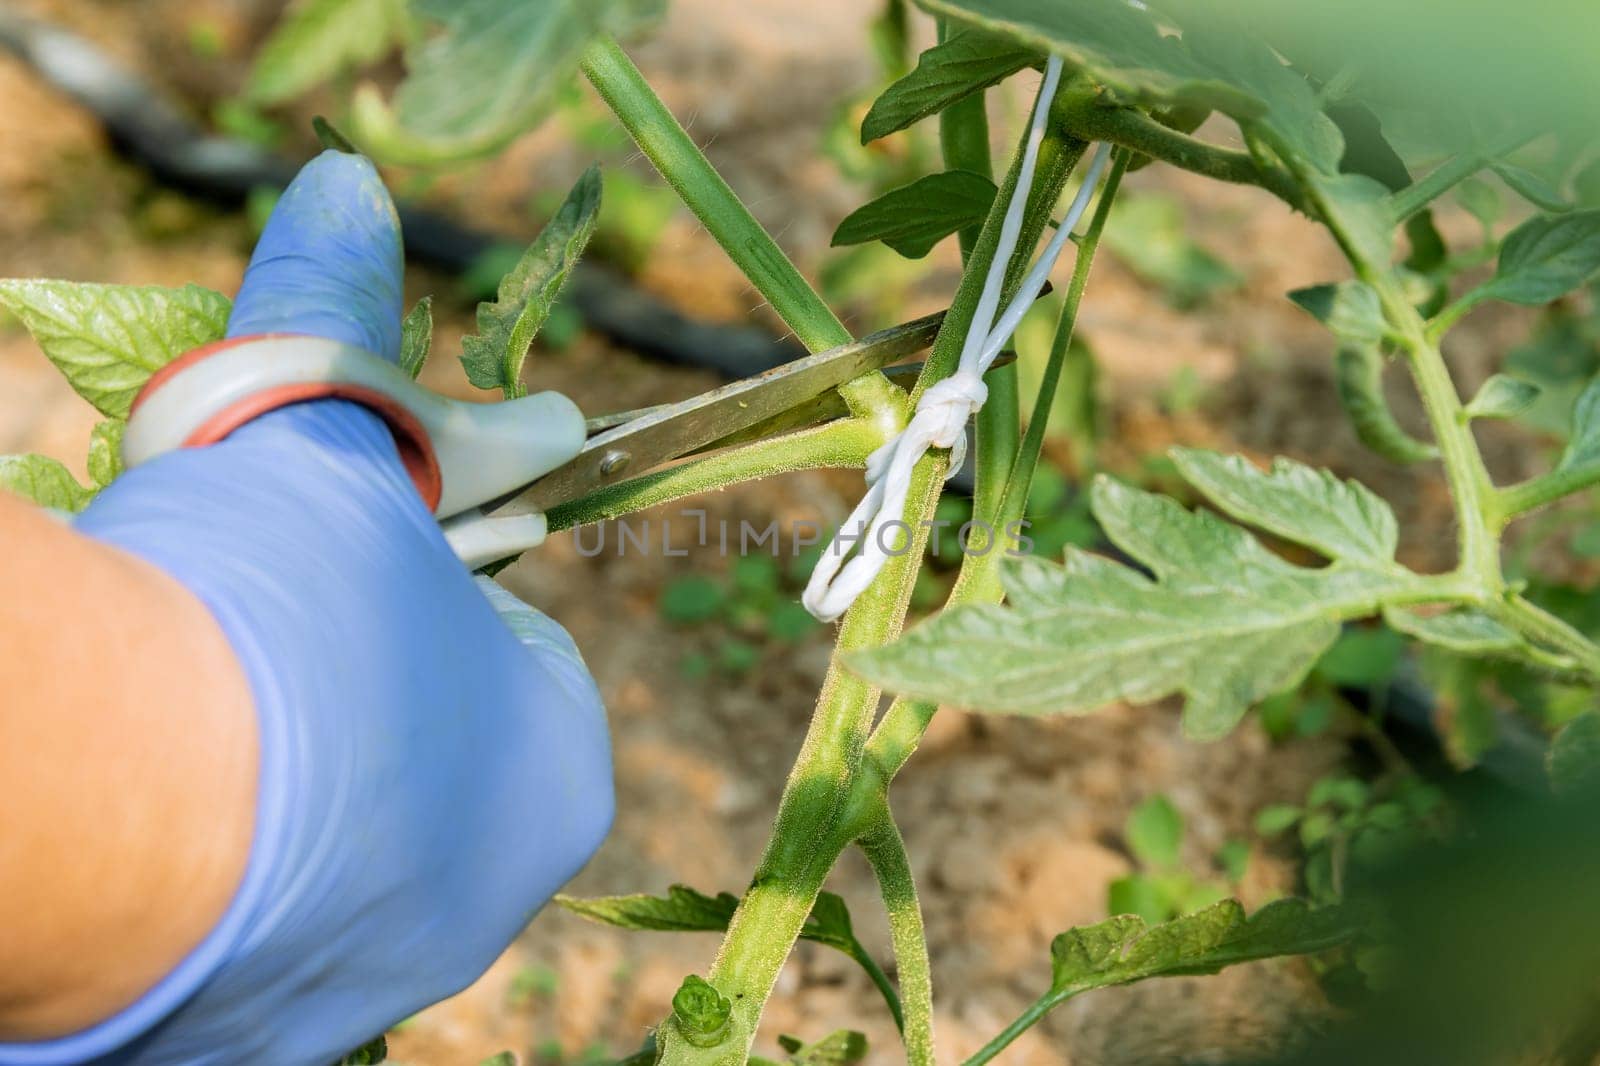 Process of removing tomato suckers helps redirect energy to fruit production. Supporting tomato plants with trellises minimizes damage from ground-dwelling pests.